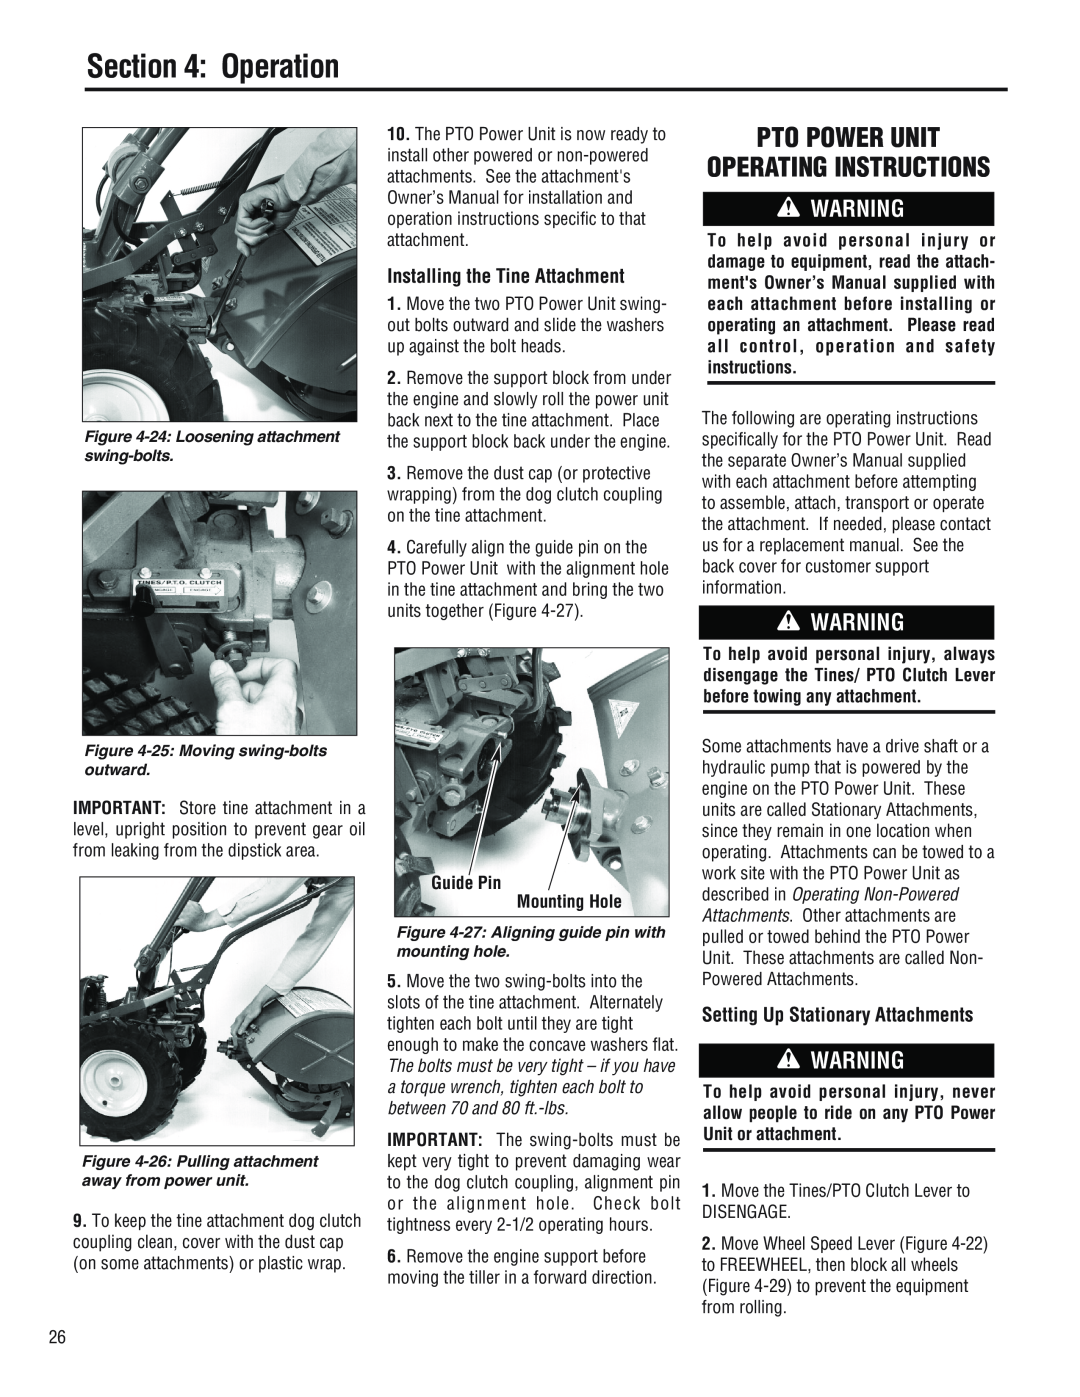 Troy-Bilt E686N Pto Power Unit Operating Instructions, Installing the Tine Attachment, Setting Up Stationary Attachments 